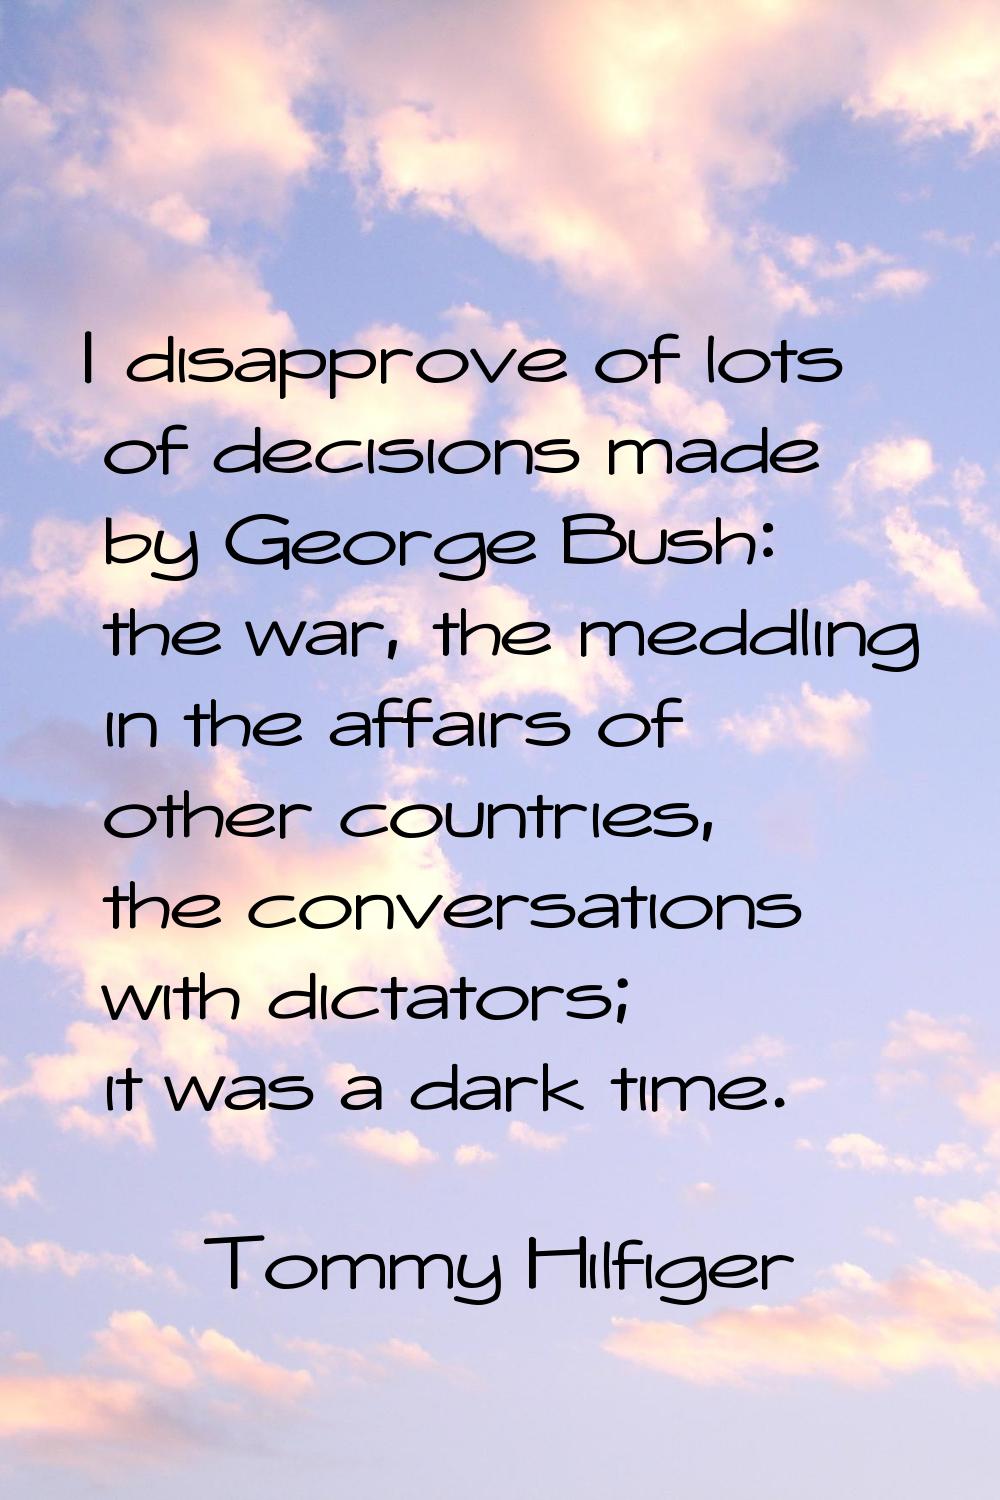 I disapprove of lots of decisions made by George Bush: the war, the meddling in the affairs of othe